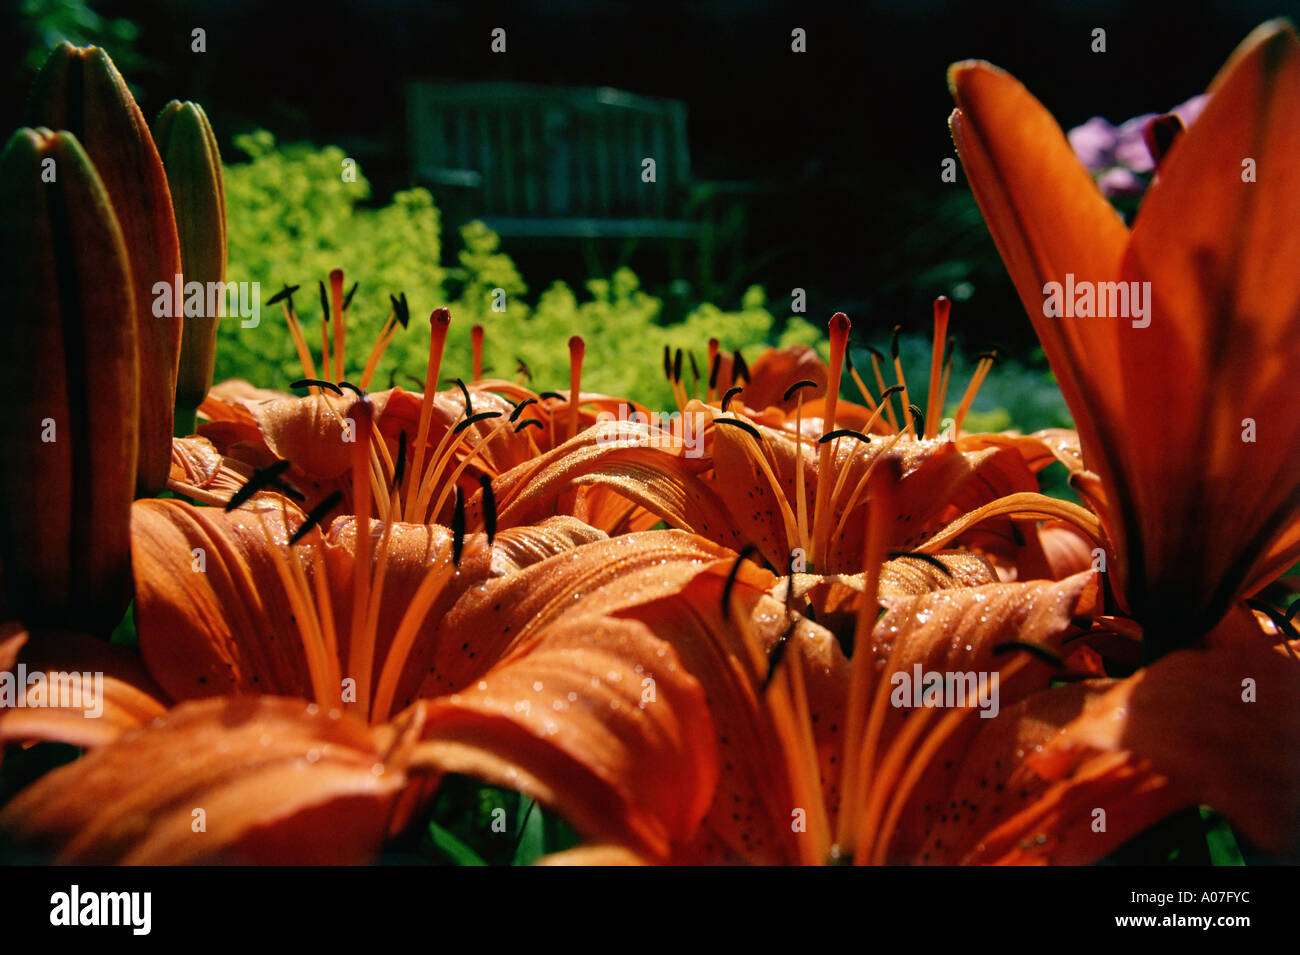 Fire King Lilies framing a wooden bench in the background. Stock Photo